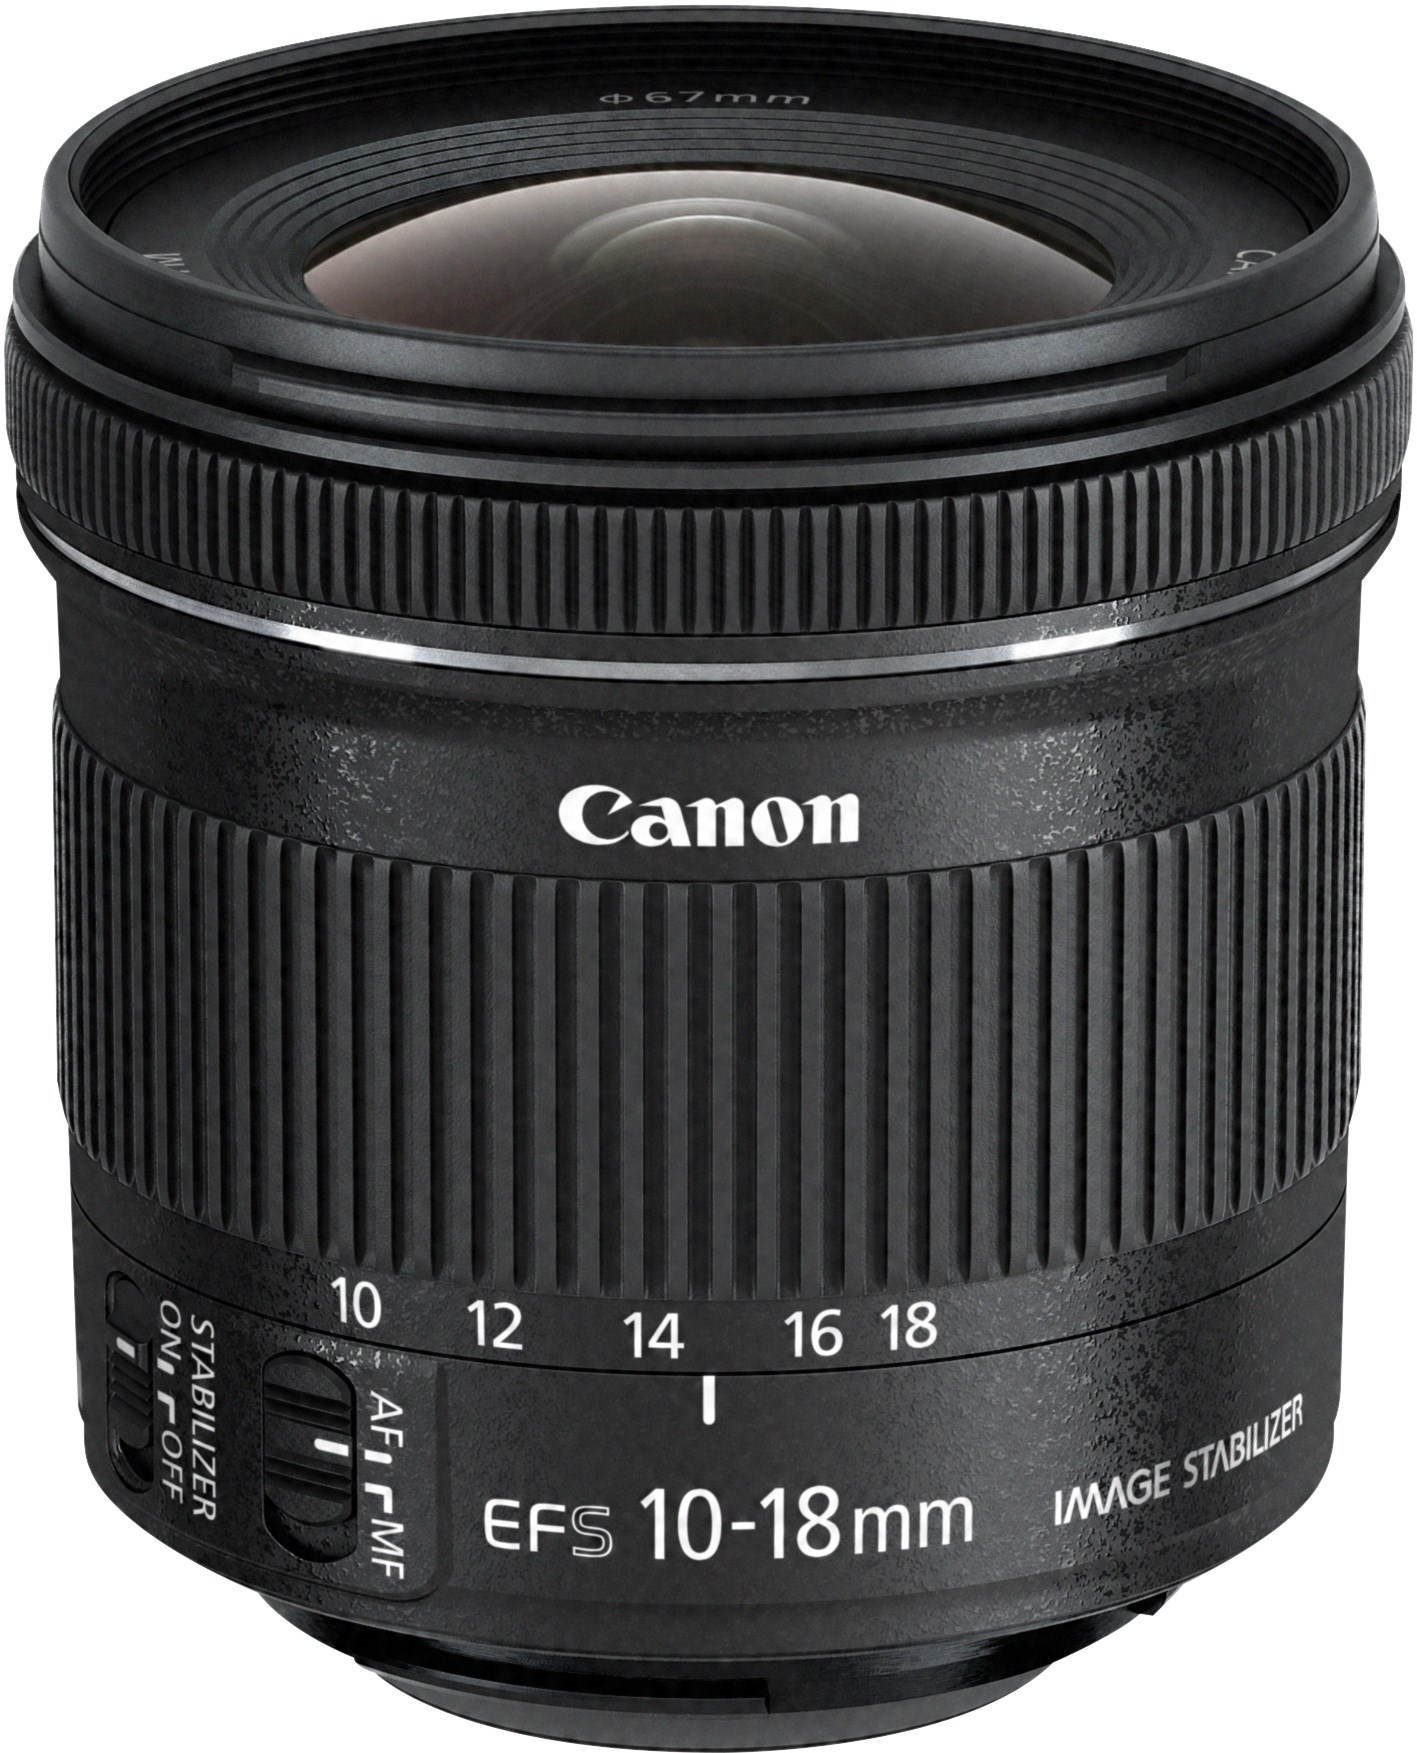 Canon EF-S 10-18mm F4.5 - 5.6 IS STM